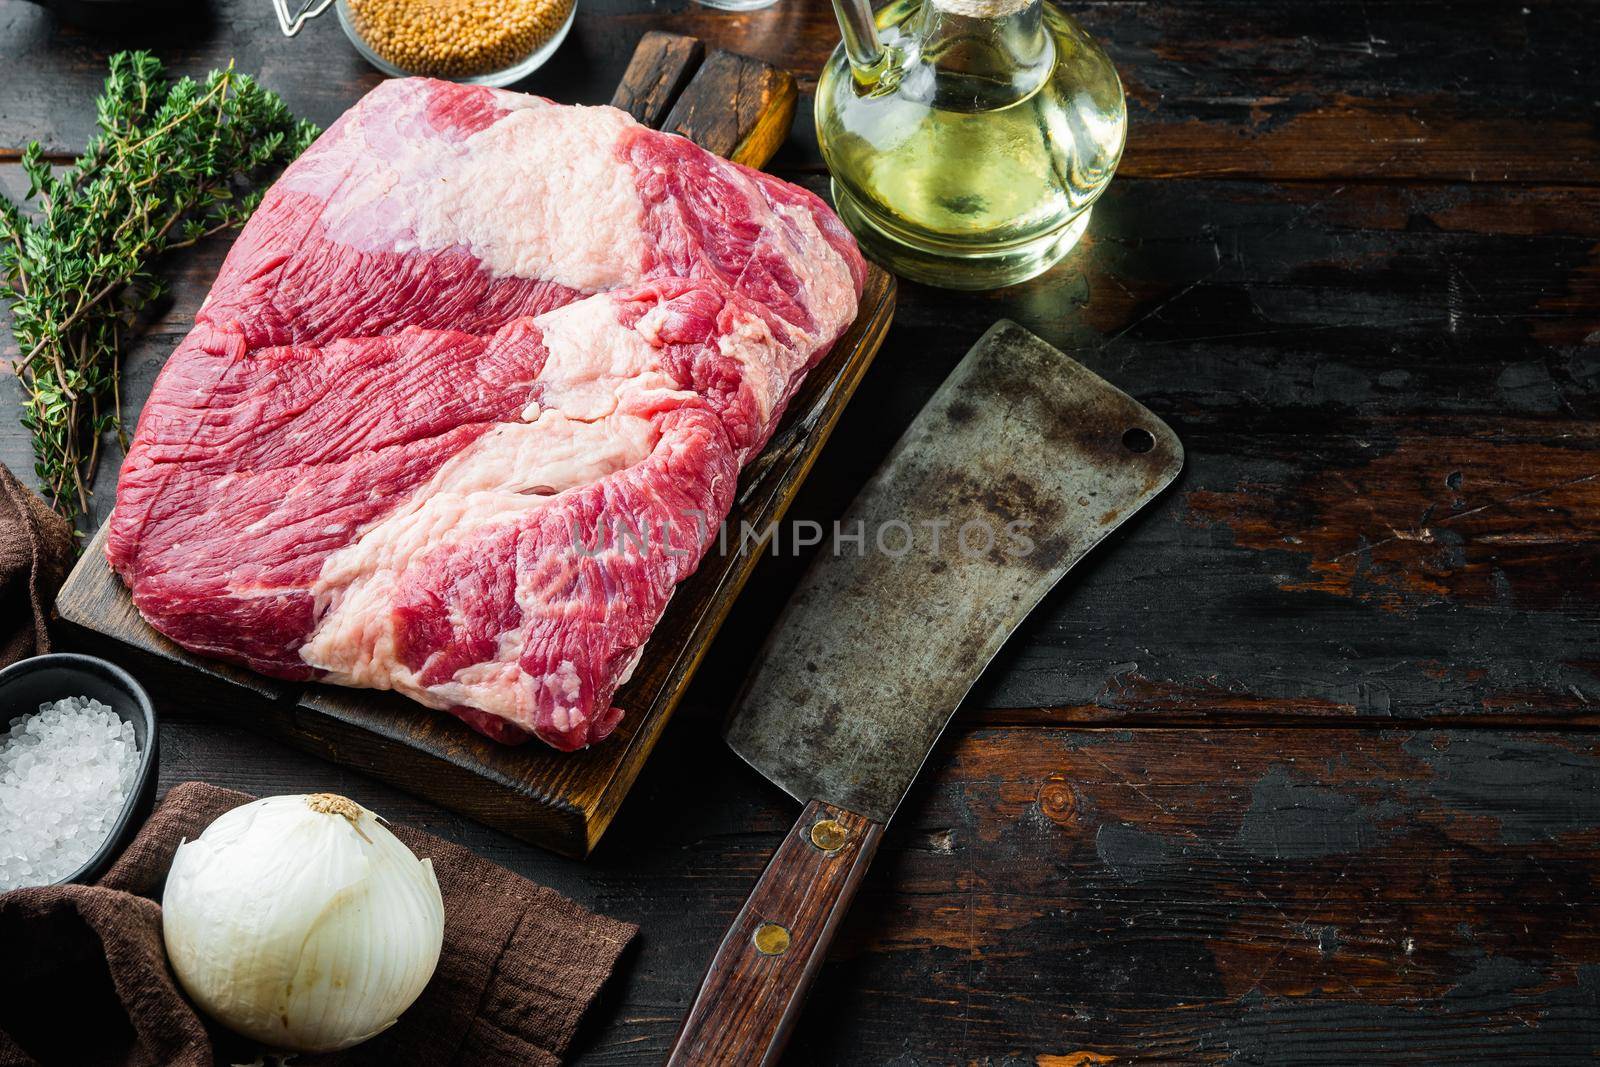 Point brisket, raw beef brisket meat set,with ingredients for smoking making barbecue, pastrami, cure, on old dark wooden table background, with copy space for text